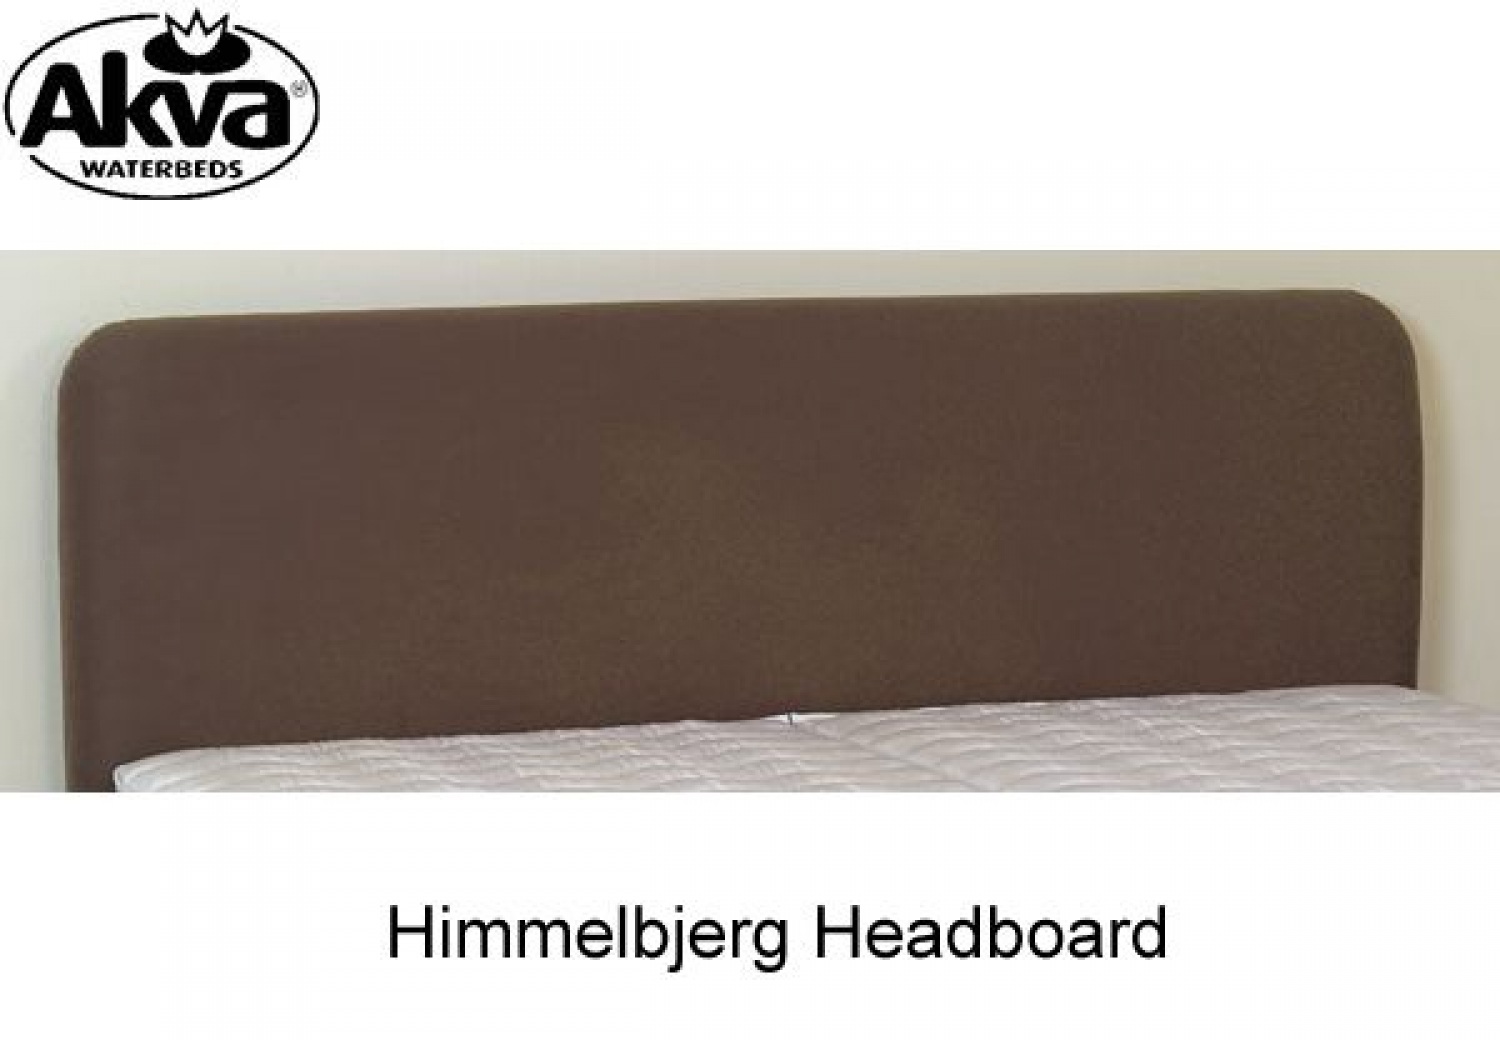 Akva Waterbed Himmelbjerg Headboard has various fabric and leather collection image